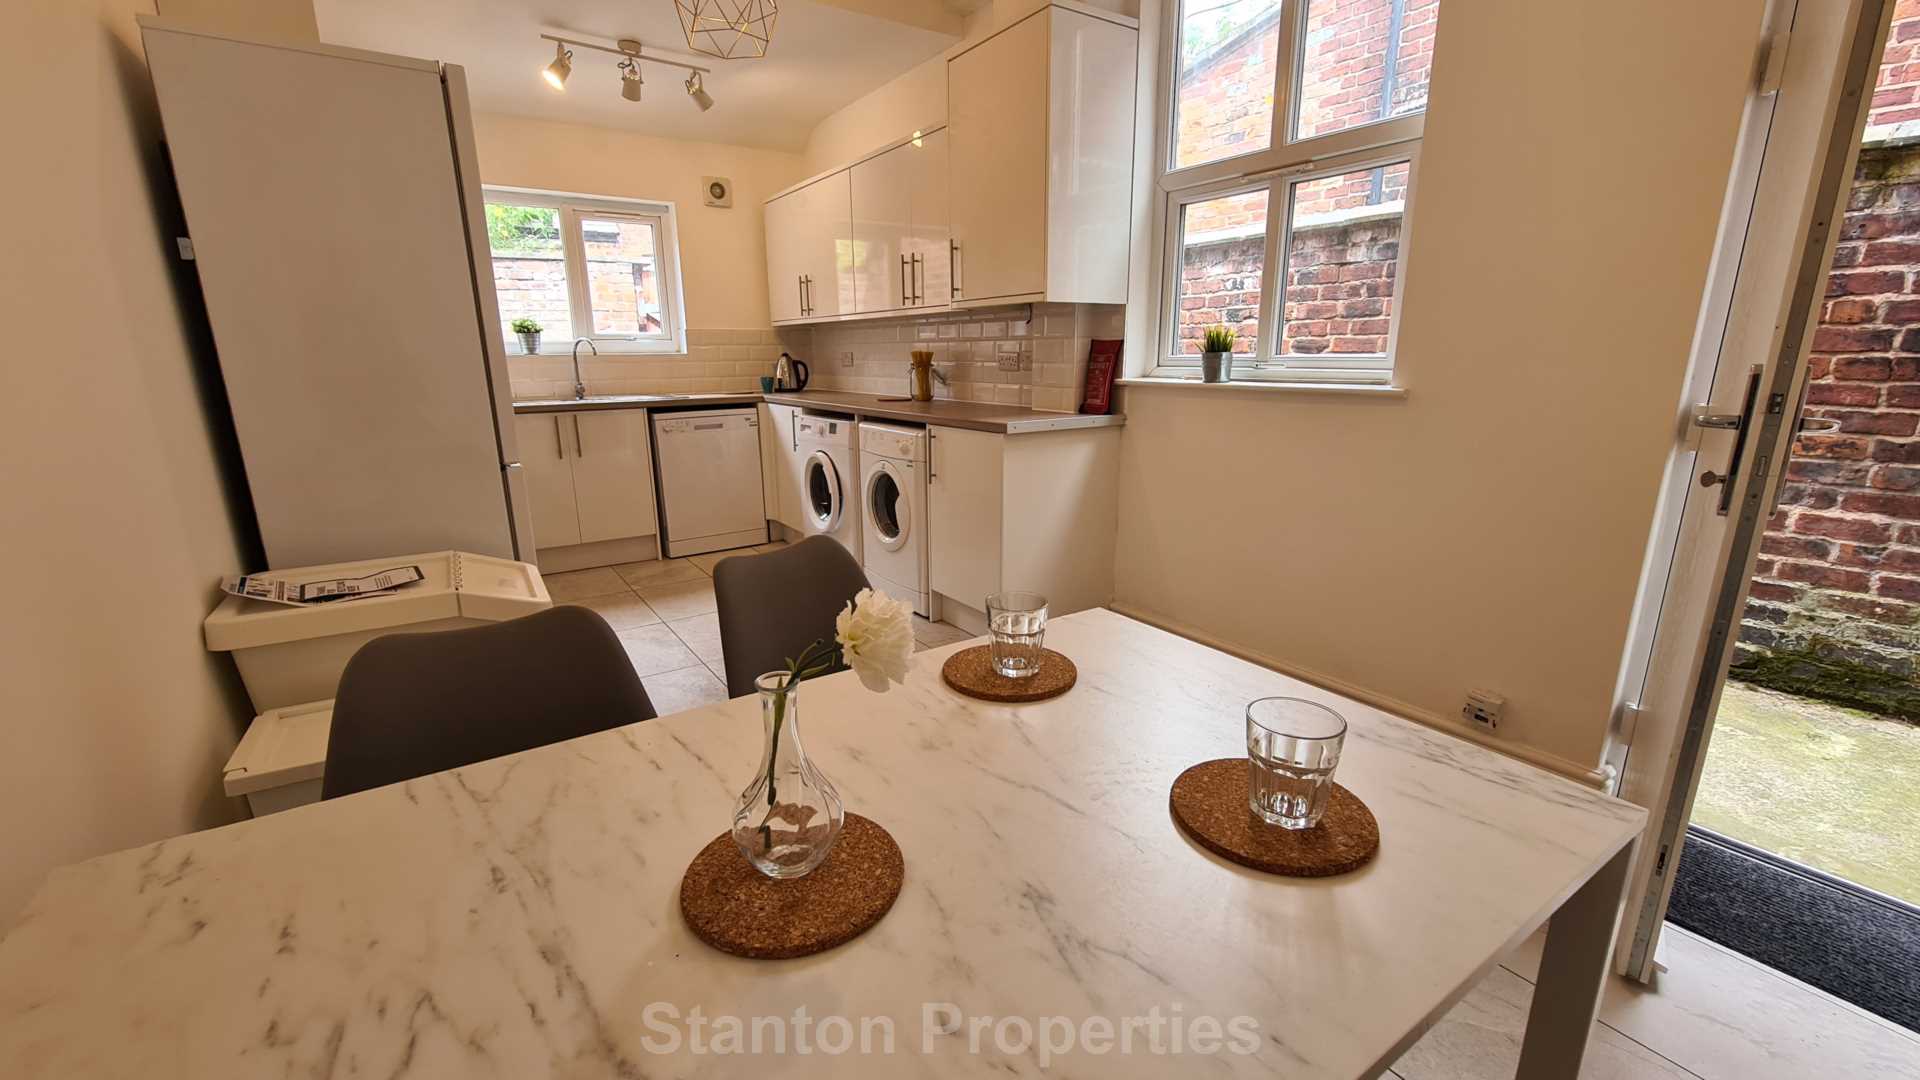 £136 pppw, See Video Tour, Furness Road, Fallowfield, Image 1